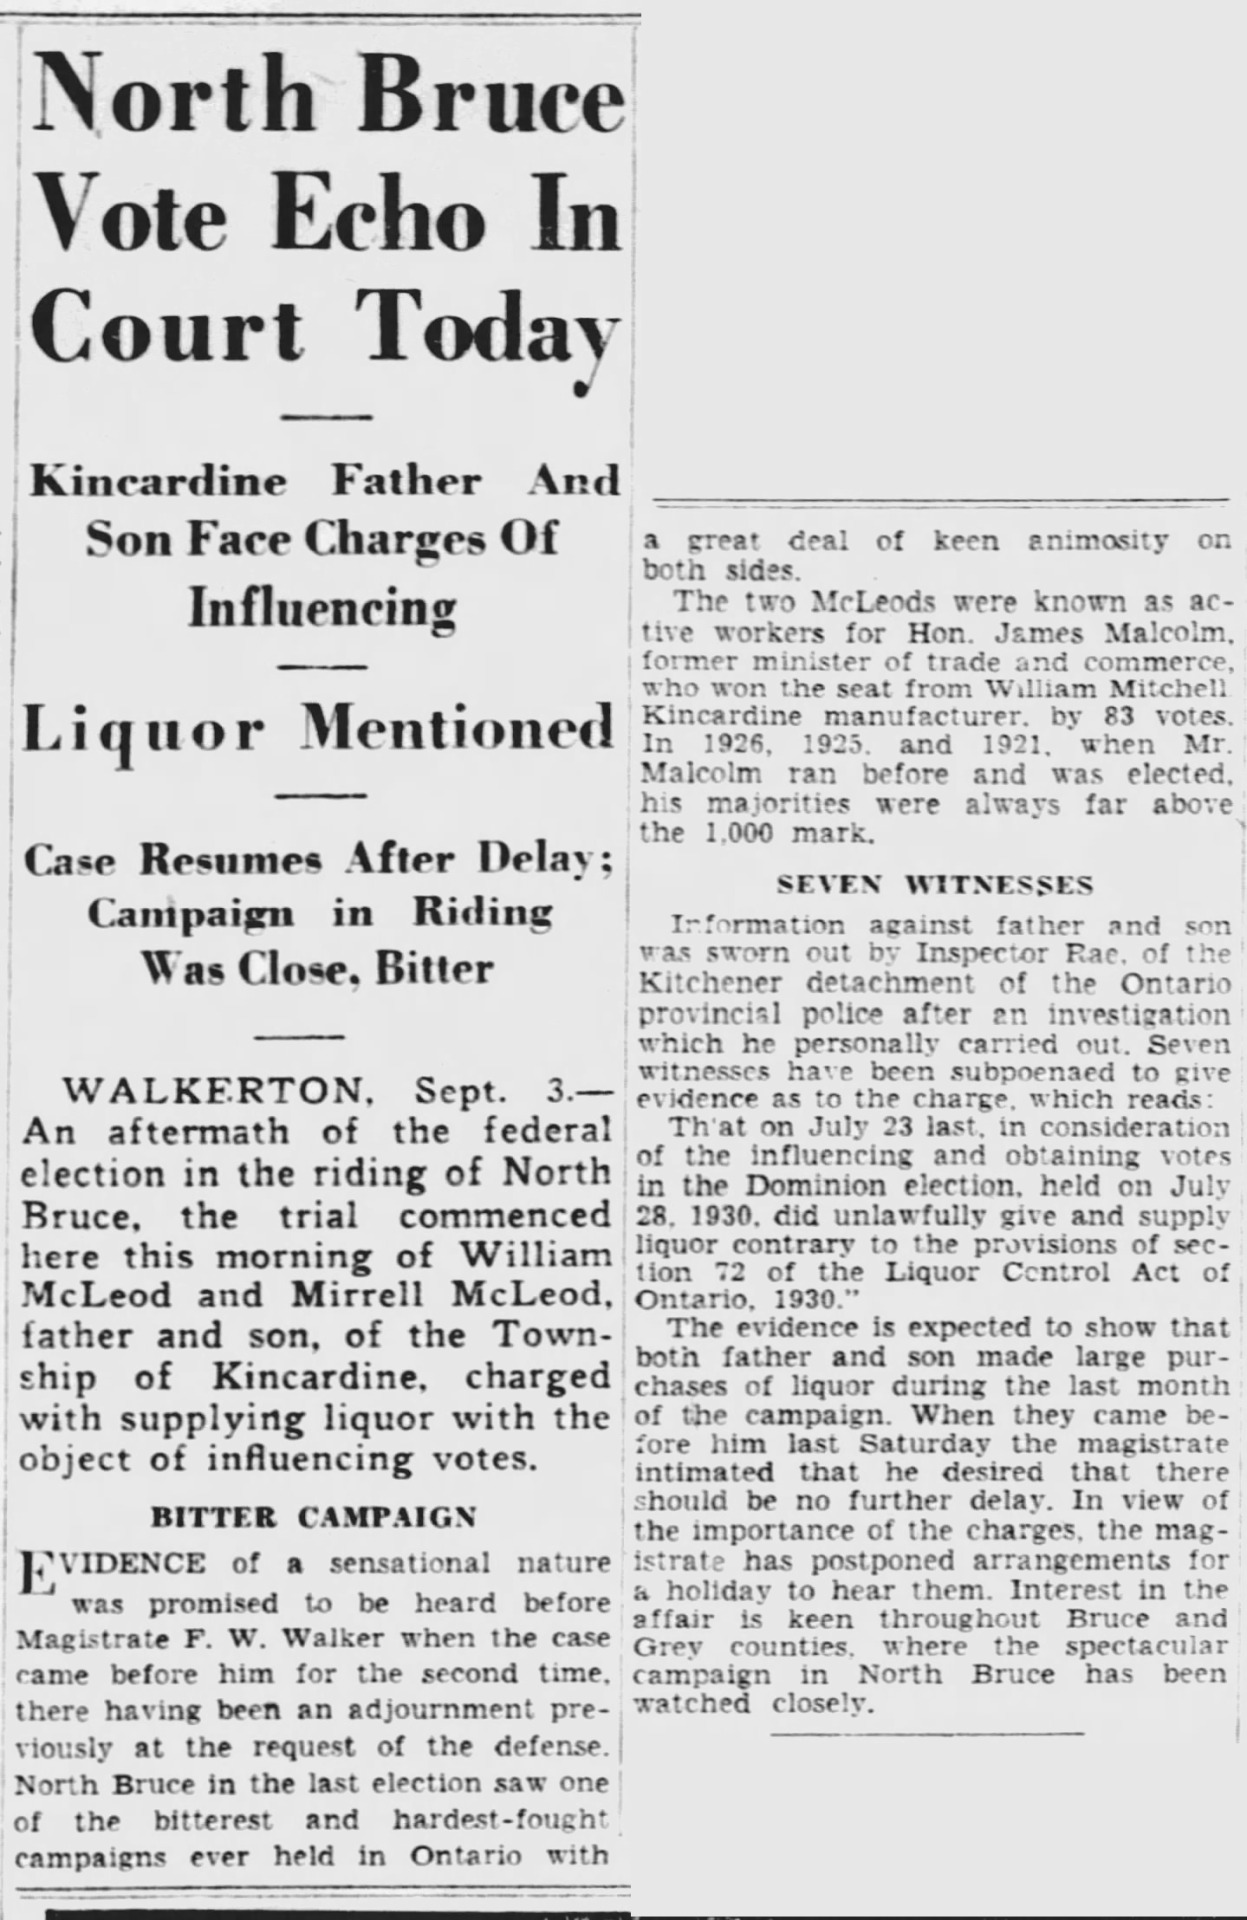 “North Bruce Vote Echo In Court Today,” Border Cities Star. September 3, 1930. Page 13. 
----
Kincardine Father And Son Face Charges Of Influencing 
---
Liquor Mentioned 
----
Case Resumes After Delay; Campaign in Riding Was Close, Bitter 
---
WALKERTON, Sept. 3. - An aftermath of the federal election in the riding of North Bruce, the trial commenced here this morning of William McLeod and Mirrell McLeod, father and son, of the Township of Kincardine, charged with supplying liquor with the object of influencing votes.BITTER CAMPAIGN
  EVIDENCE of a sensational nature was promised to be heard before Magistrate F. W. Walker when the case came before him for the second time, there having been an adjournment previously at the request of the defense. North Bruce in the last election saw one of the bitterest and hardest-fought campaigns ever held in Ontario with a great deal of keen animosity on both sides. 

The two McLeods were known as active workers for Hon. James Malcolm, former minister of trade and commerce, who won the seat from William Mitchell, manufacturer, by 83 votes. In 1926, 1925. and 1921. when Mr. Malcolm ran before and was elected, his majorities were always far above the 1.000 mark.

SEVEN WITNESSES 
Information against father and son was sworn out by Inspector Rae, of the Kitchener detachment of the Ontario provincial police after an investigation which he personally carried out. Seven witnesses have been subpoenaed to give evidence as to the charge, which reads: ‘That on July 23 last, in consideration of the influencing and obtaining votes in the Dominion election, held on July 28, 1930, did unlawfully give and supply liquor contrary to the provisions of section 72 of the Liquor Control Act of Ontario. 1930.’ The evidence is expected to show that both father and son made large purchases of liquor during the last month of the campaign. When they came before him last Saturday the magistrate intimated that he desired that there should be no further delay. In view of the importance of the charges the magistrate has postponed arrangements for a holiday to hear them. Interest in the affair is keen throughout Bruce and Grey counties where the spectacular campaon in North Bruce has been watched closely.   #walkteron#bruce county #1930 federal election #election count#vote tampering#vote buying#tight race#federal riding#political corruption#kincardine #get out the vote #election workers #house of commons  #parliament of canada  #member of parliament  #great depression in canada  #crime and punishment in canada  #history of crime and punishment in canada